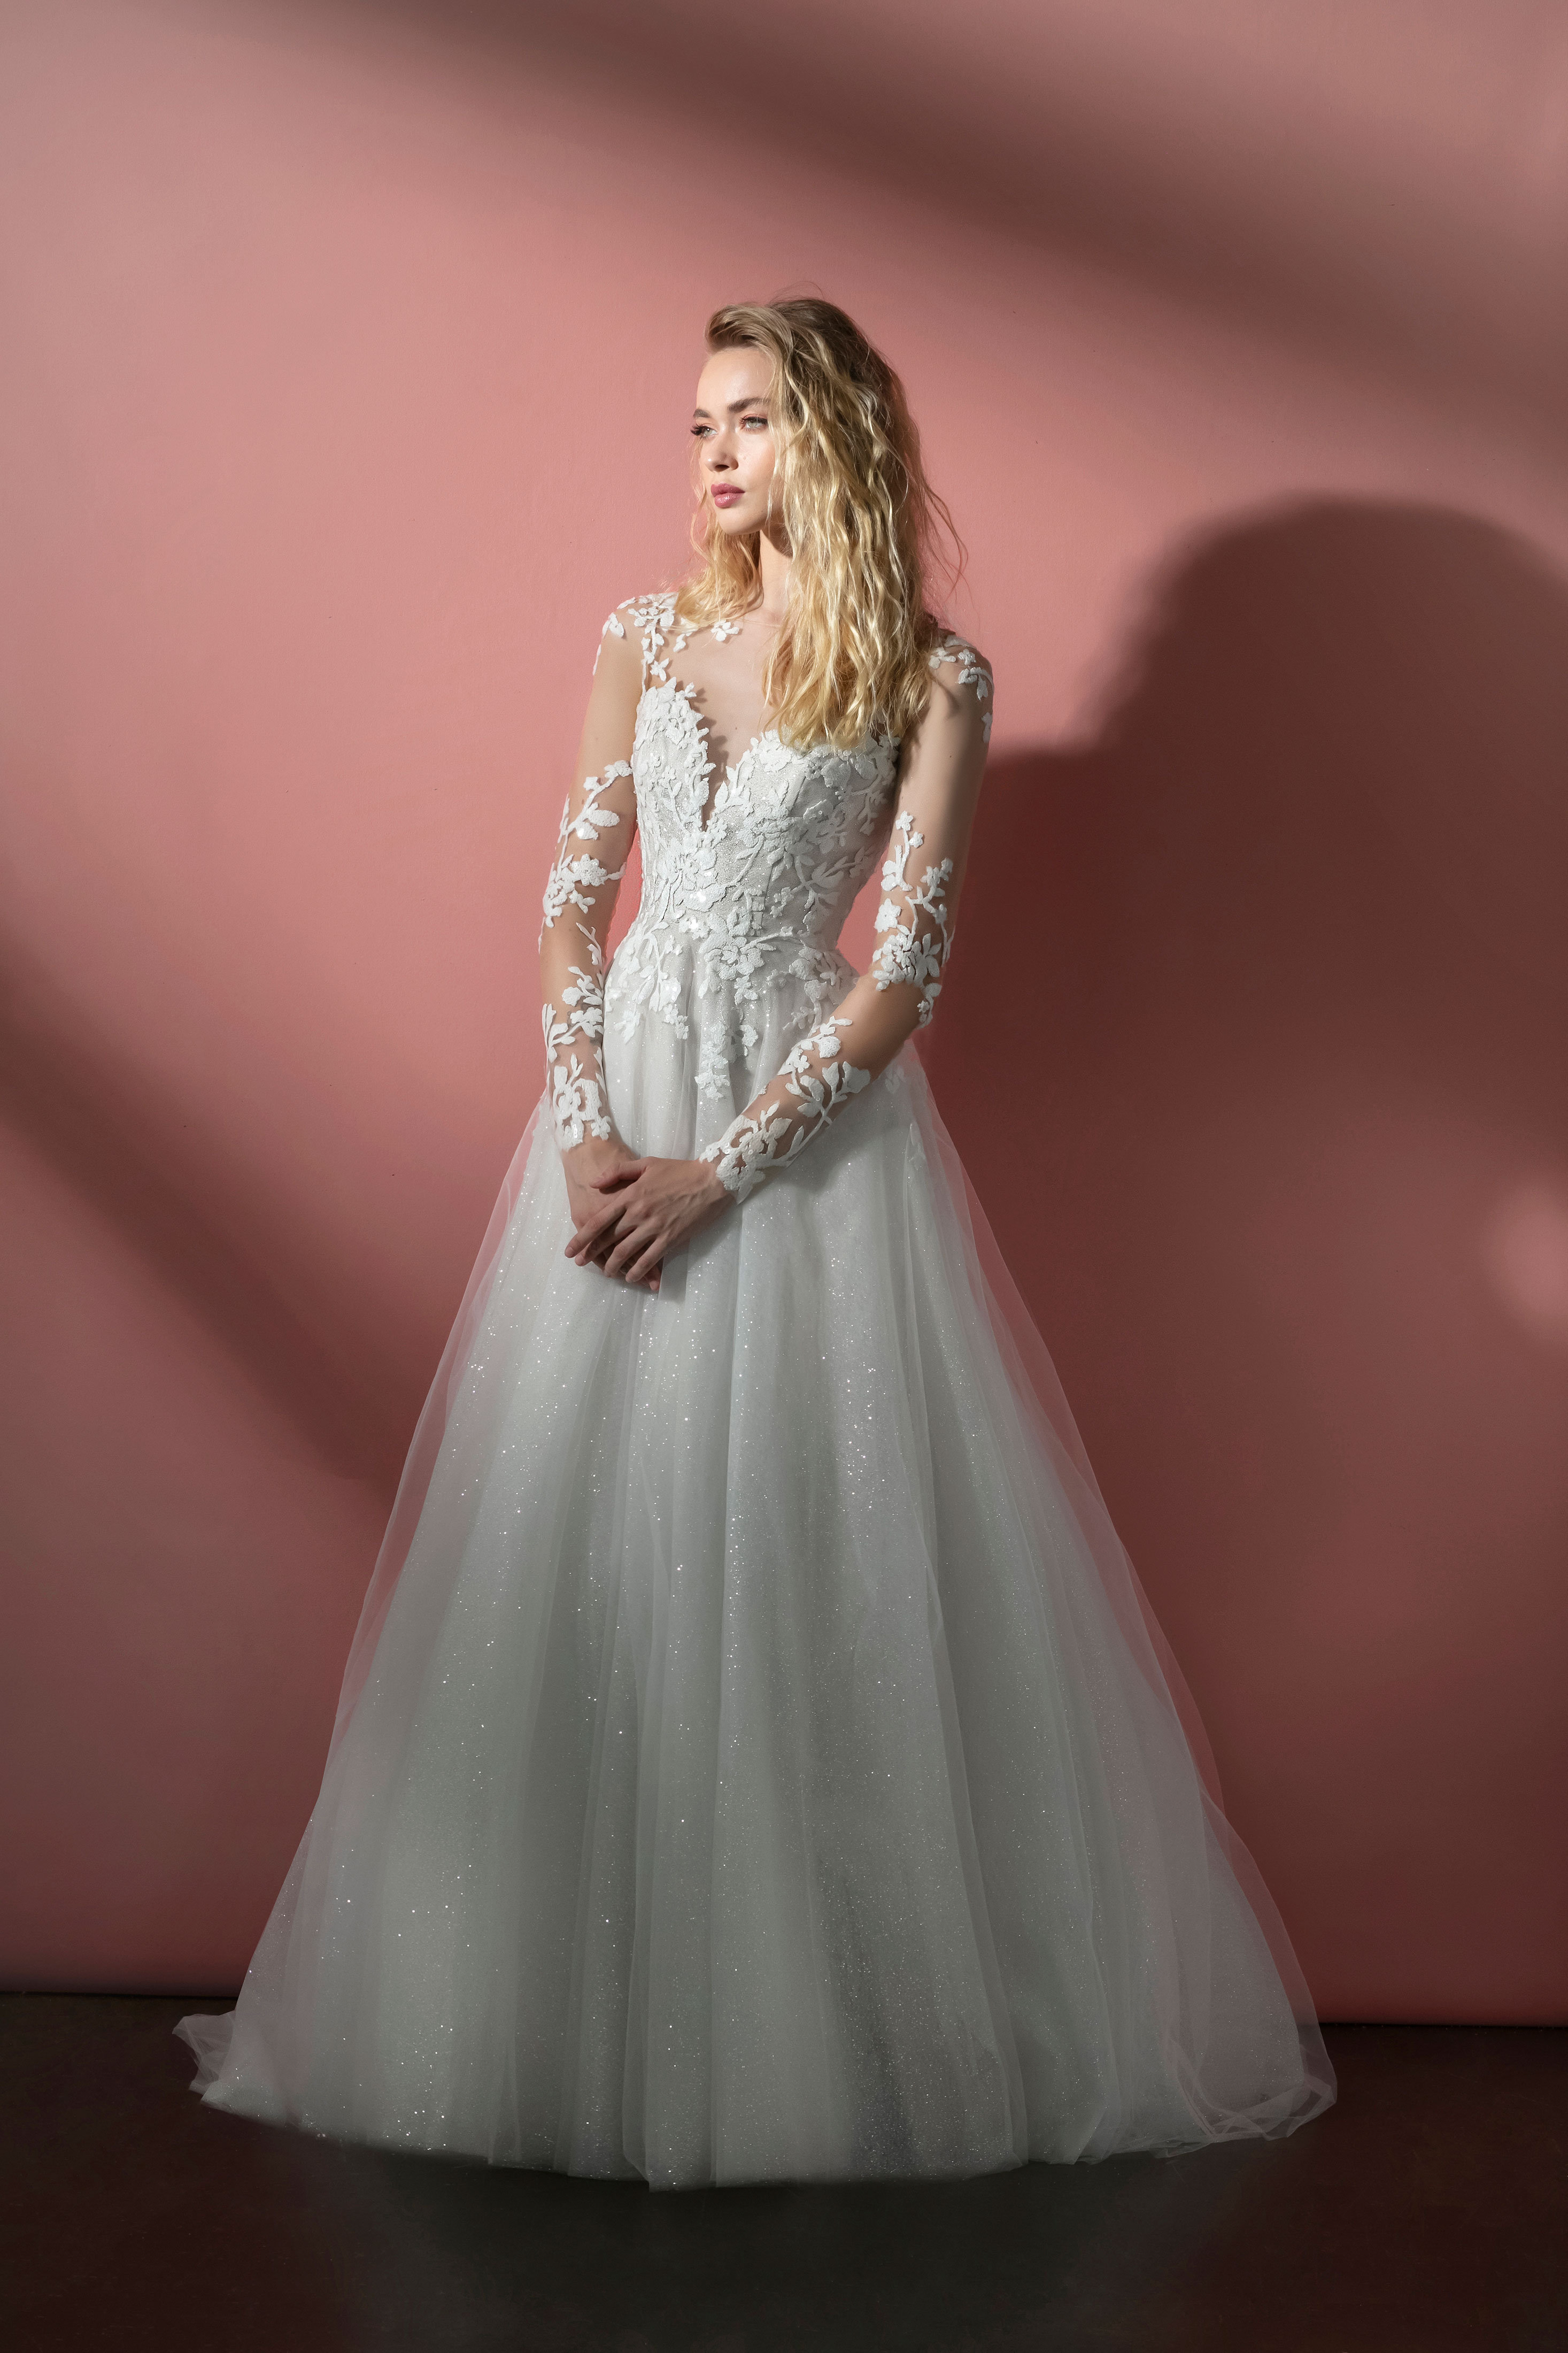 Bridal Gowns and Wedding Dresses by JLM 